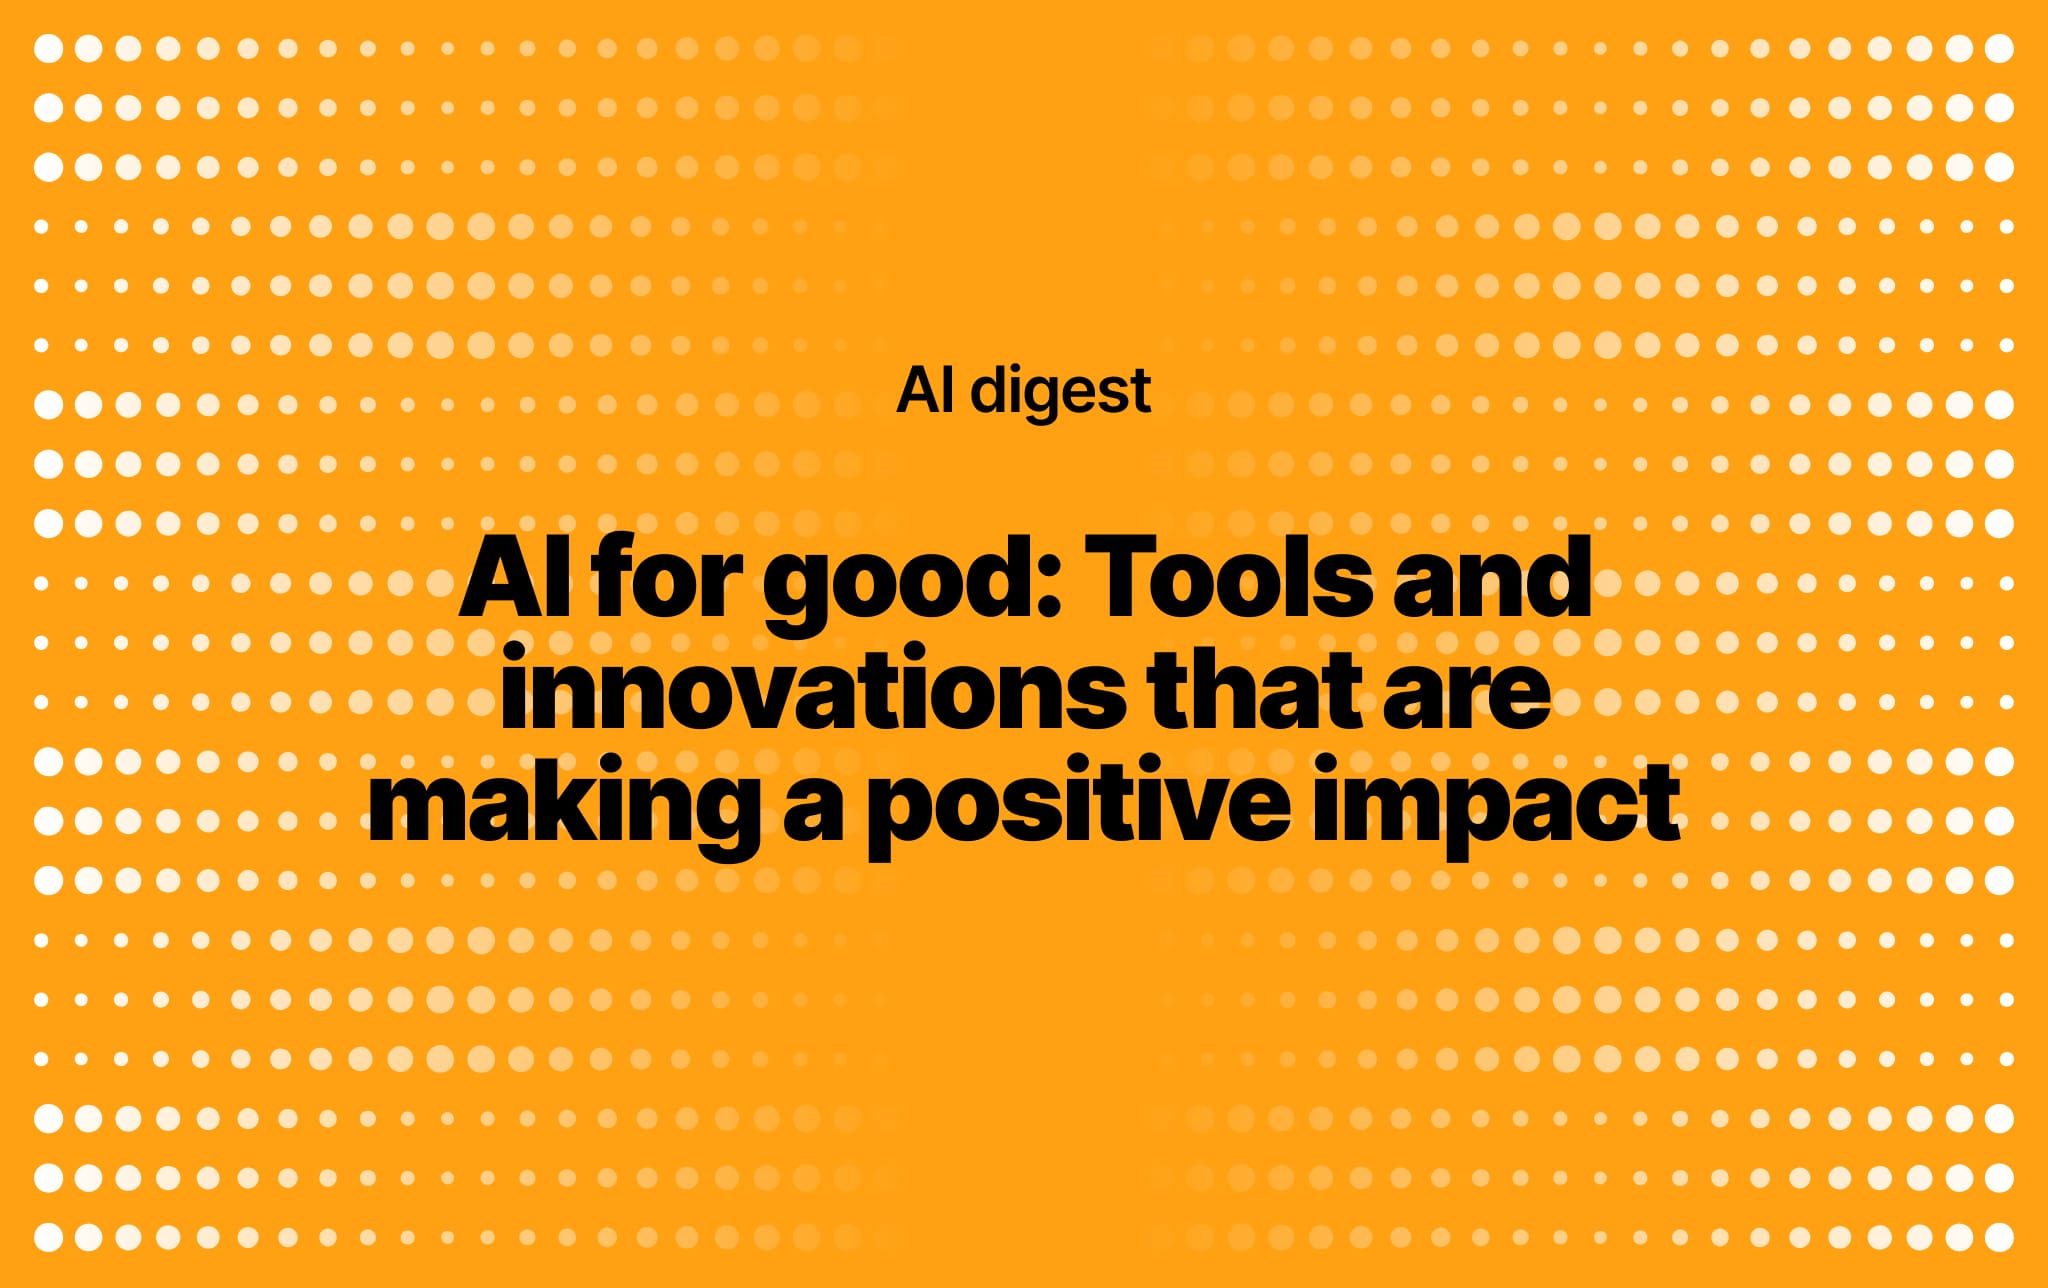 AI for good: Tools and innovations that are making a positive impact